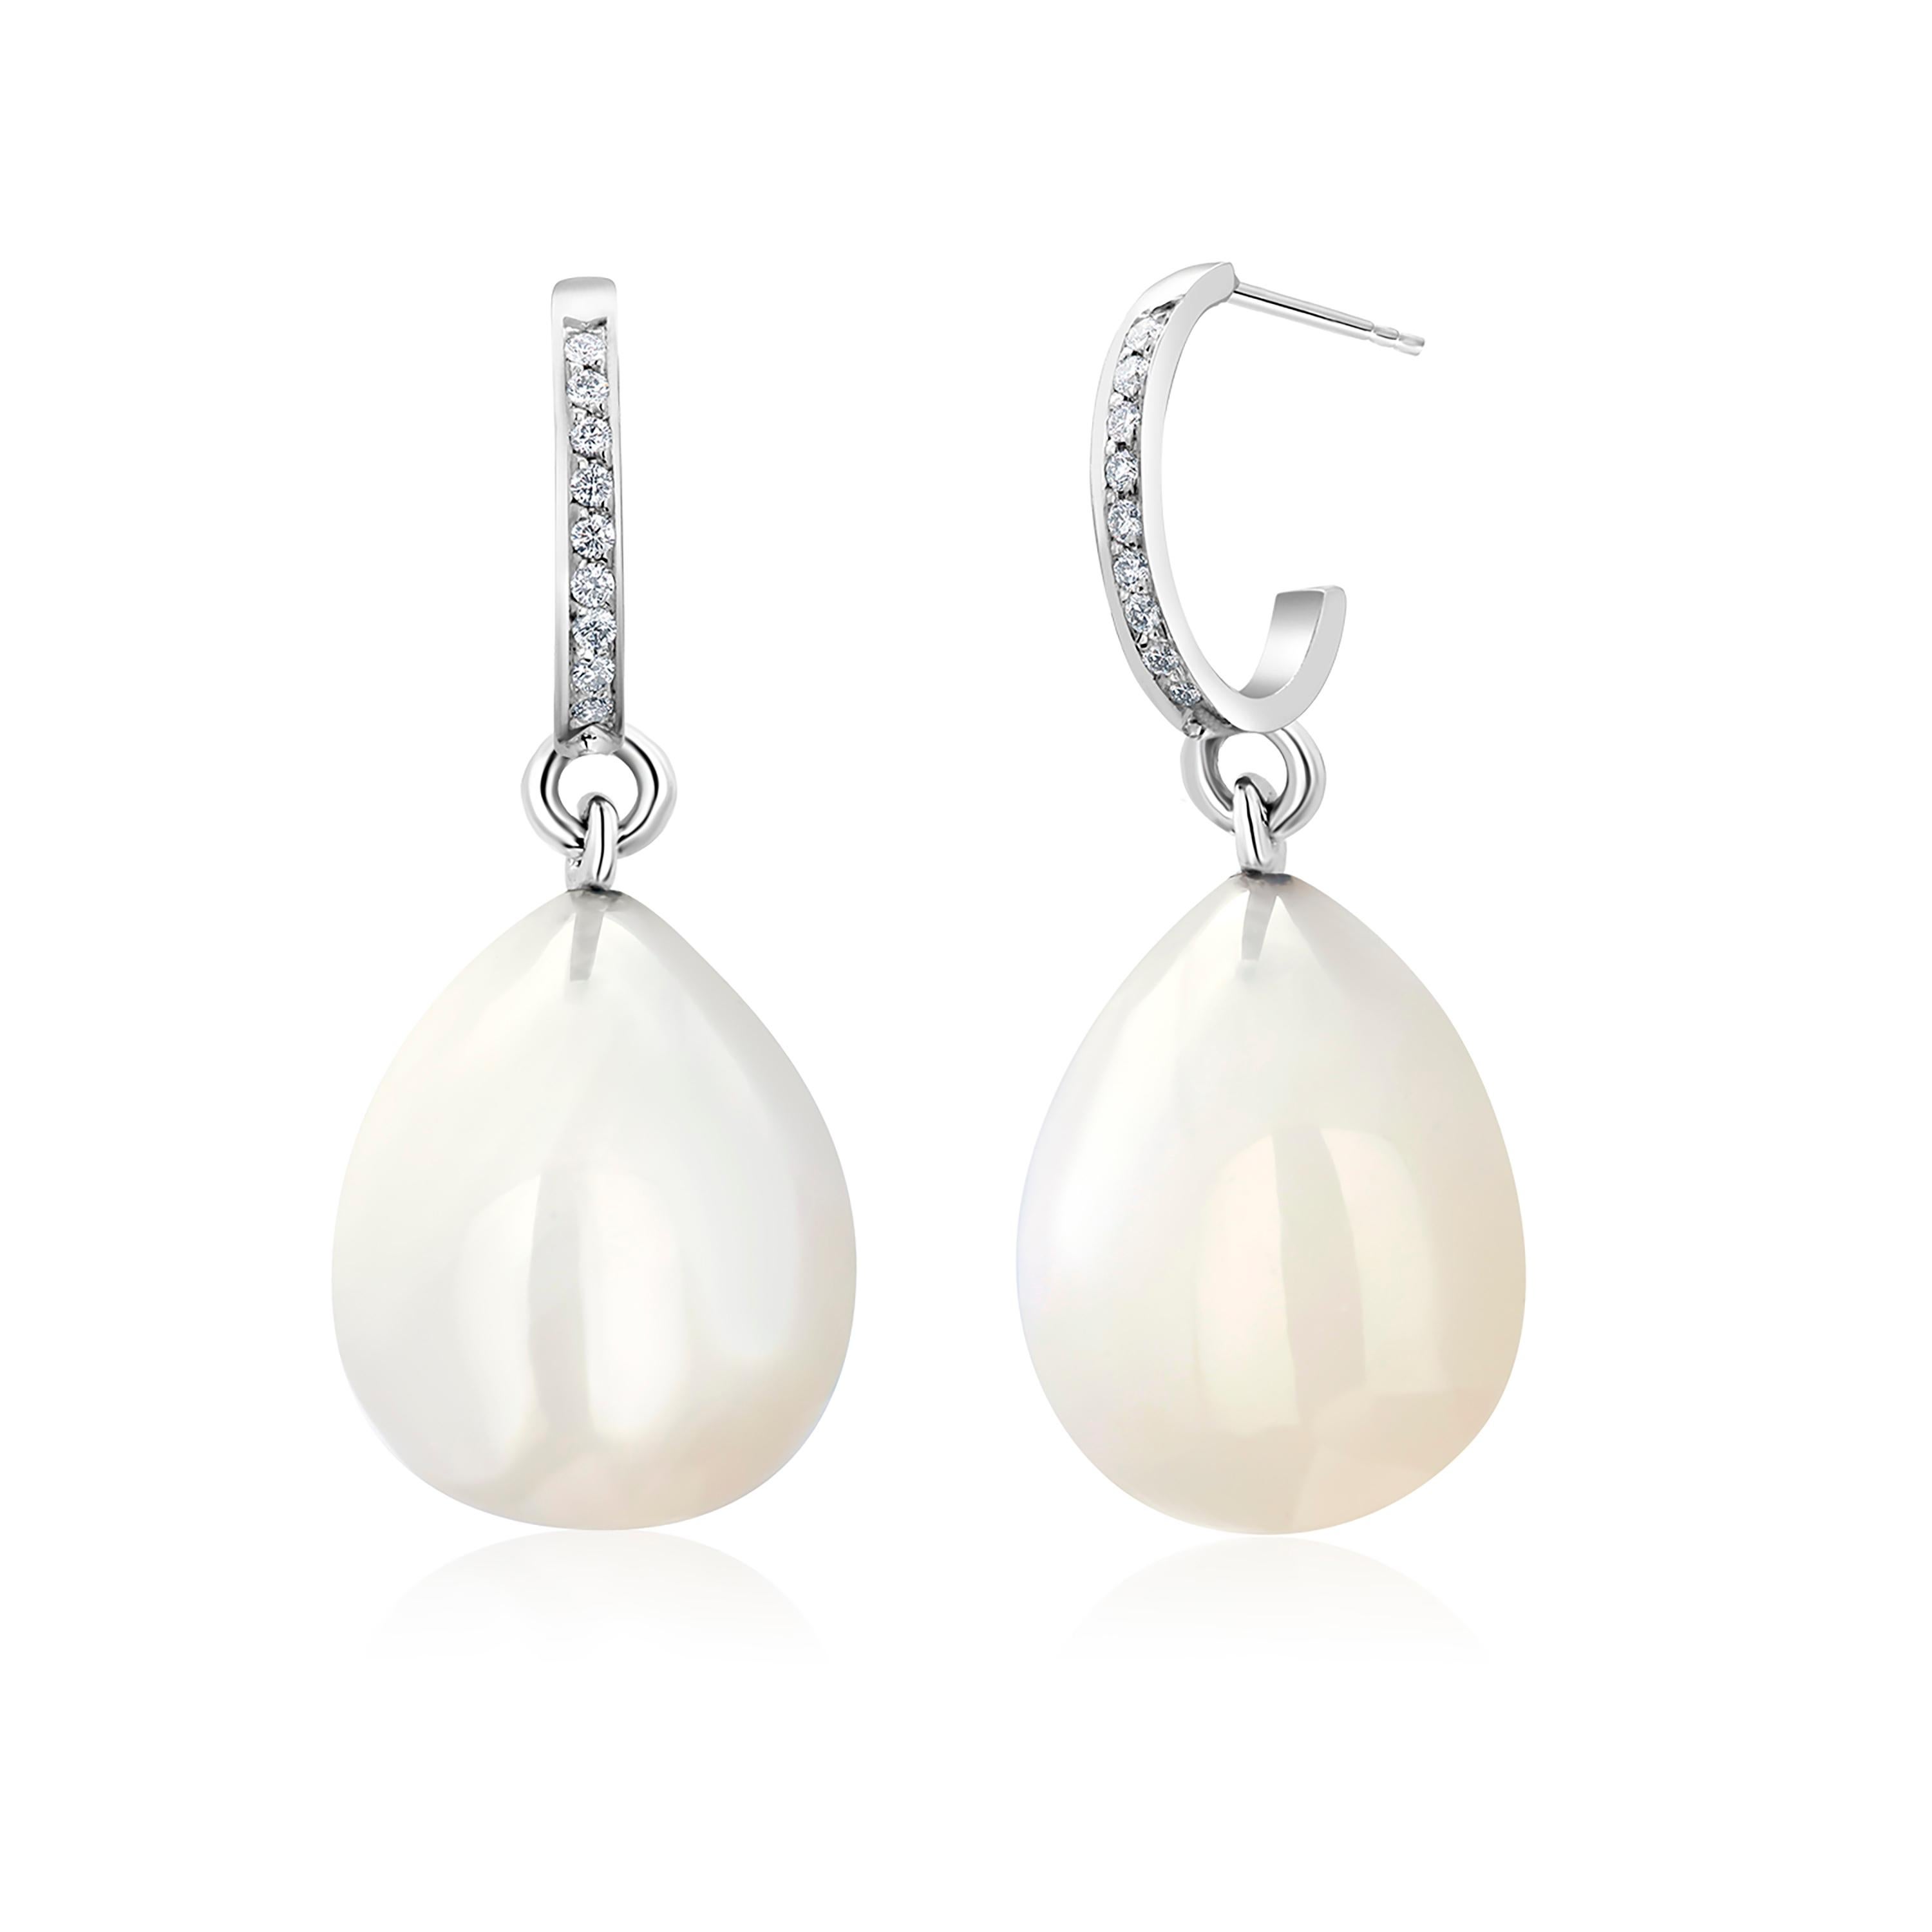 Women's or Men's White Moonstone Drops and Diamond Gold Hoop Earrings Weighing 21.86 Carats